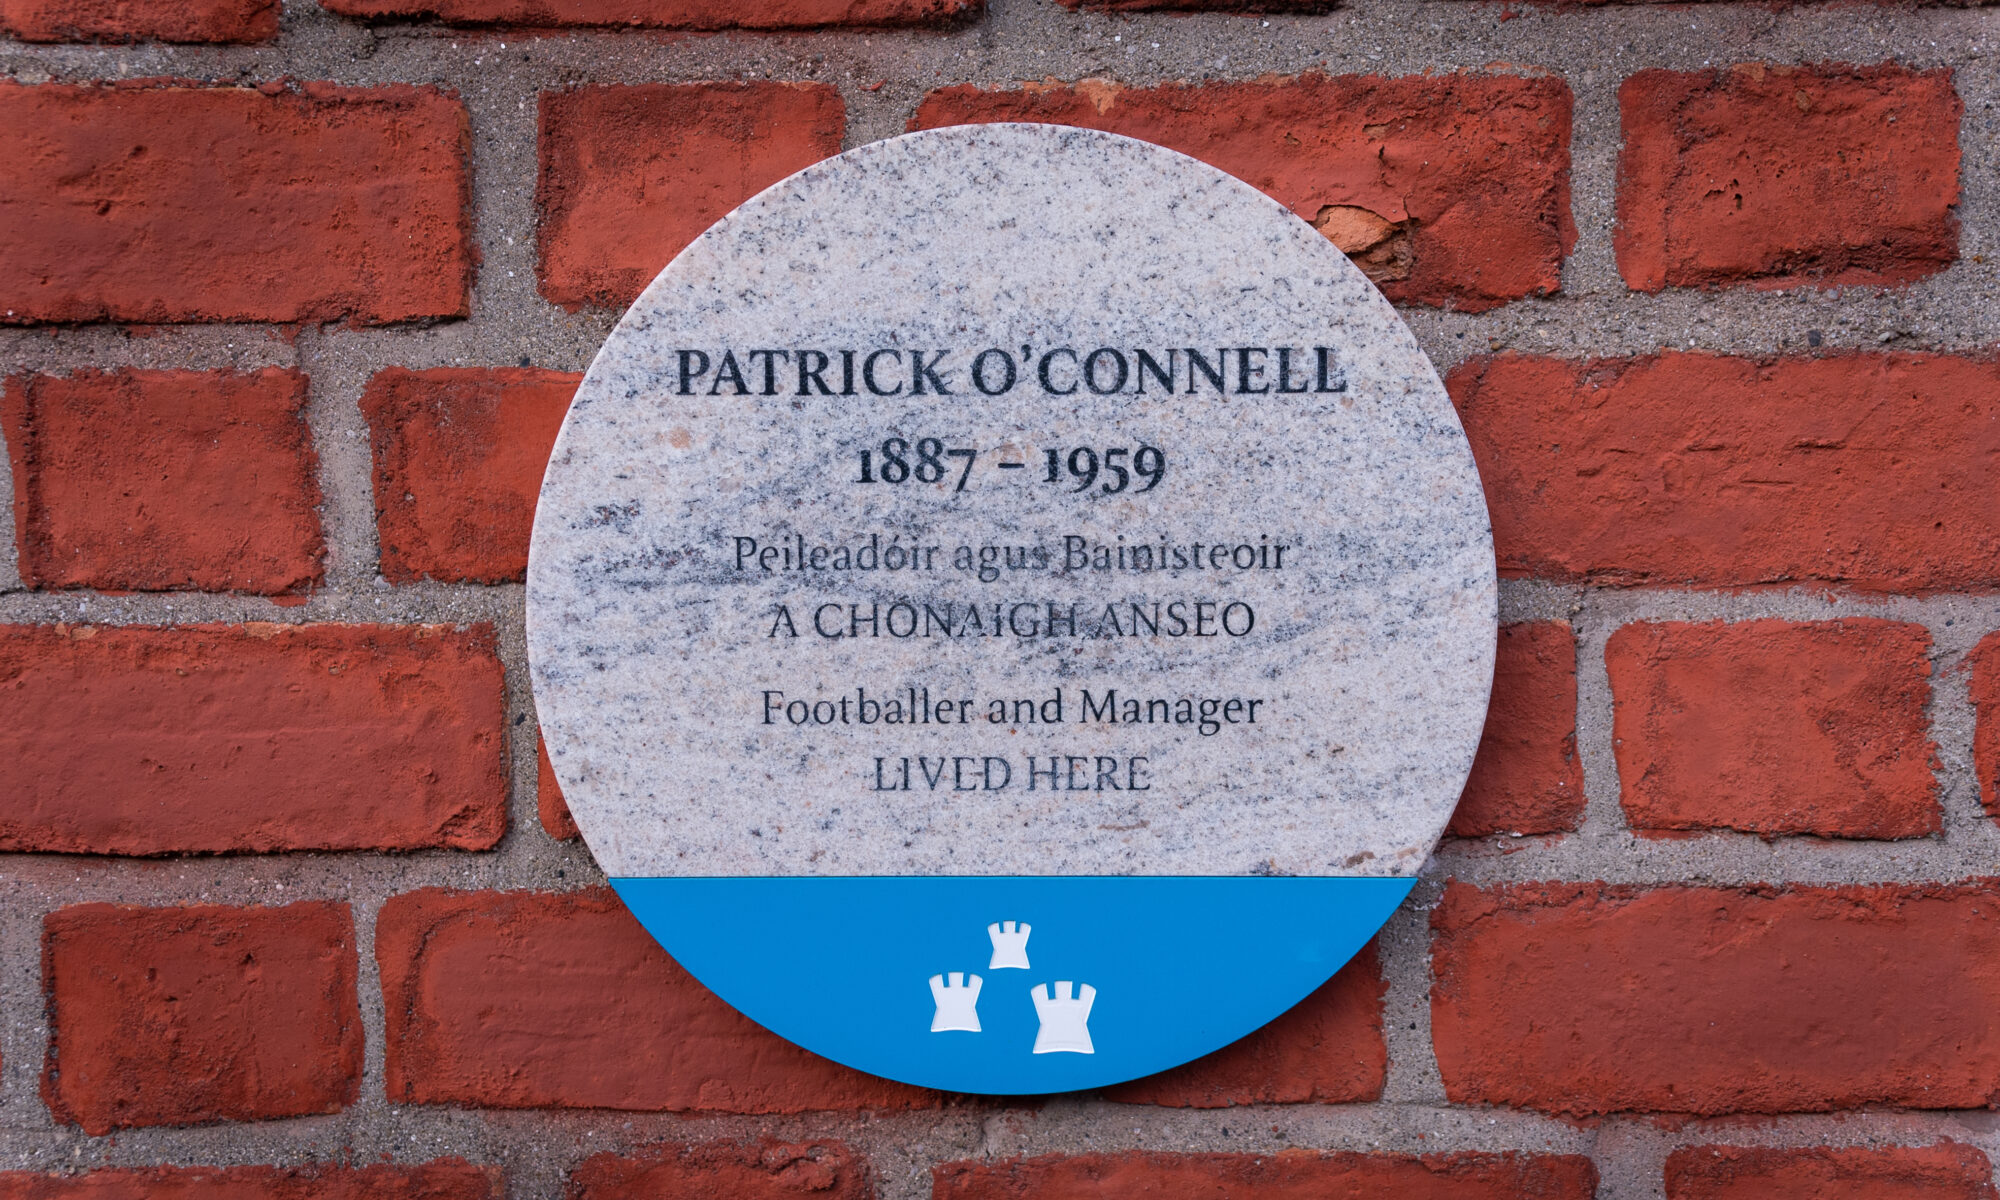 Photograph of Dublin City Council plaque honouring Patrick O'Connell